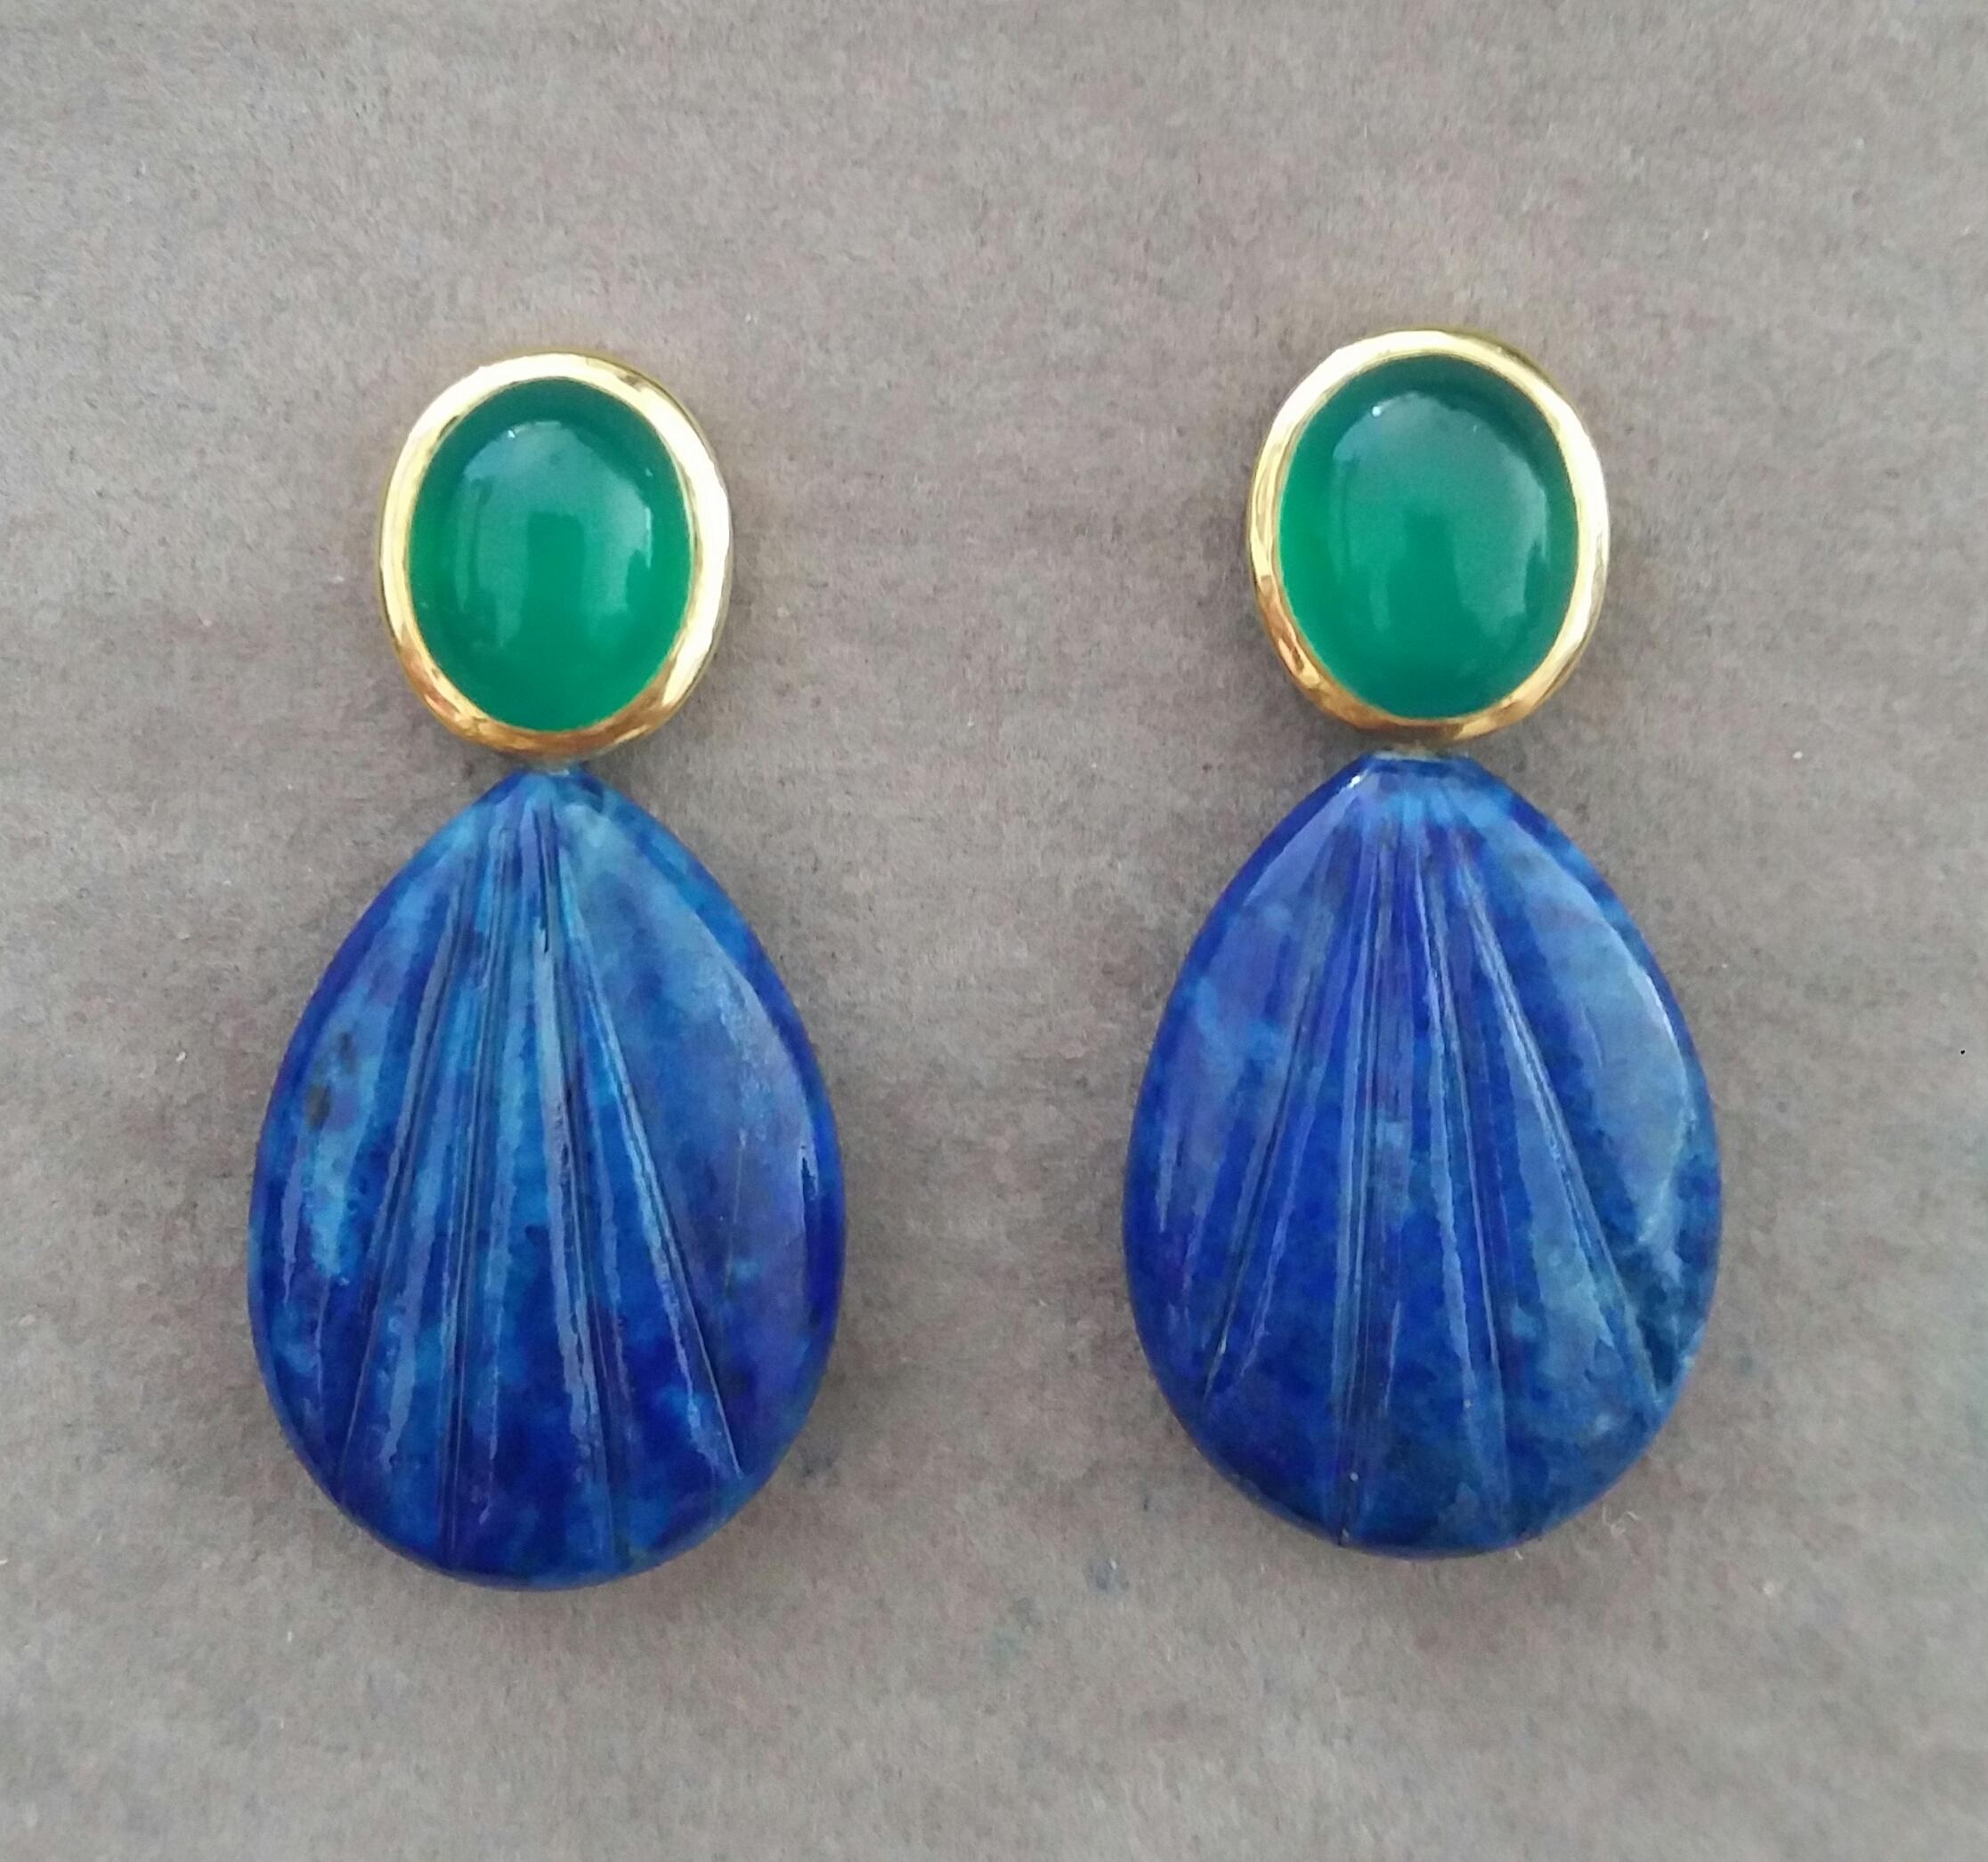 Elegant and completely handmade Earrings consisting of  upper parts of 2 oval shape Green Onyx Cabs measuring 9x11 mm set in a 14 Kt yellow gold bezel , in the lower part we have 2 Engraved Flat Drop Shape Natural Color Lapis Lazuli measuring 18x25 